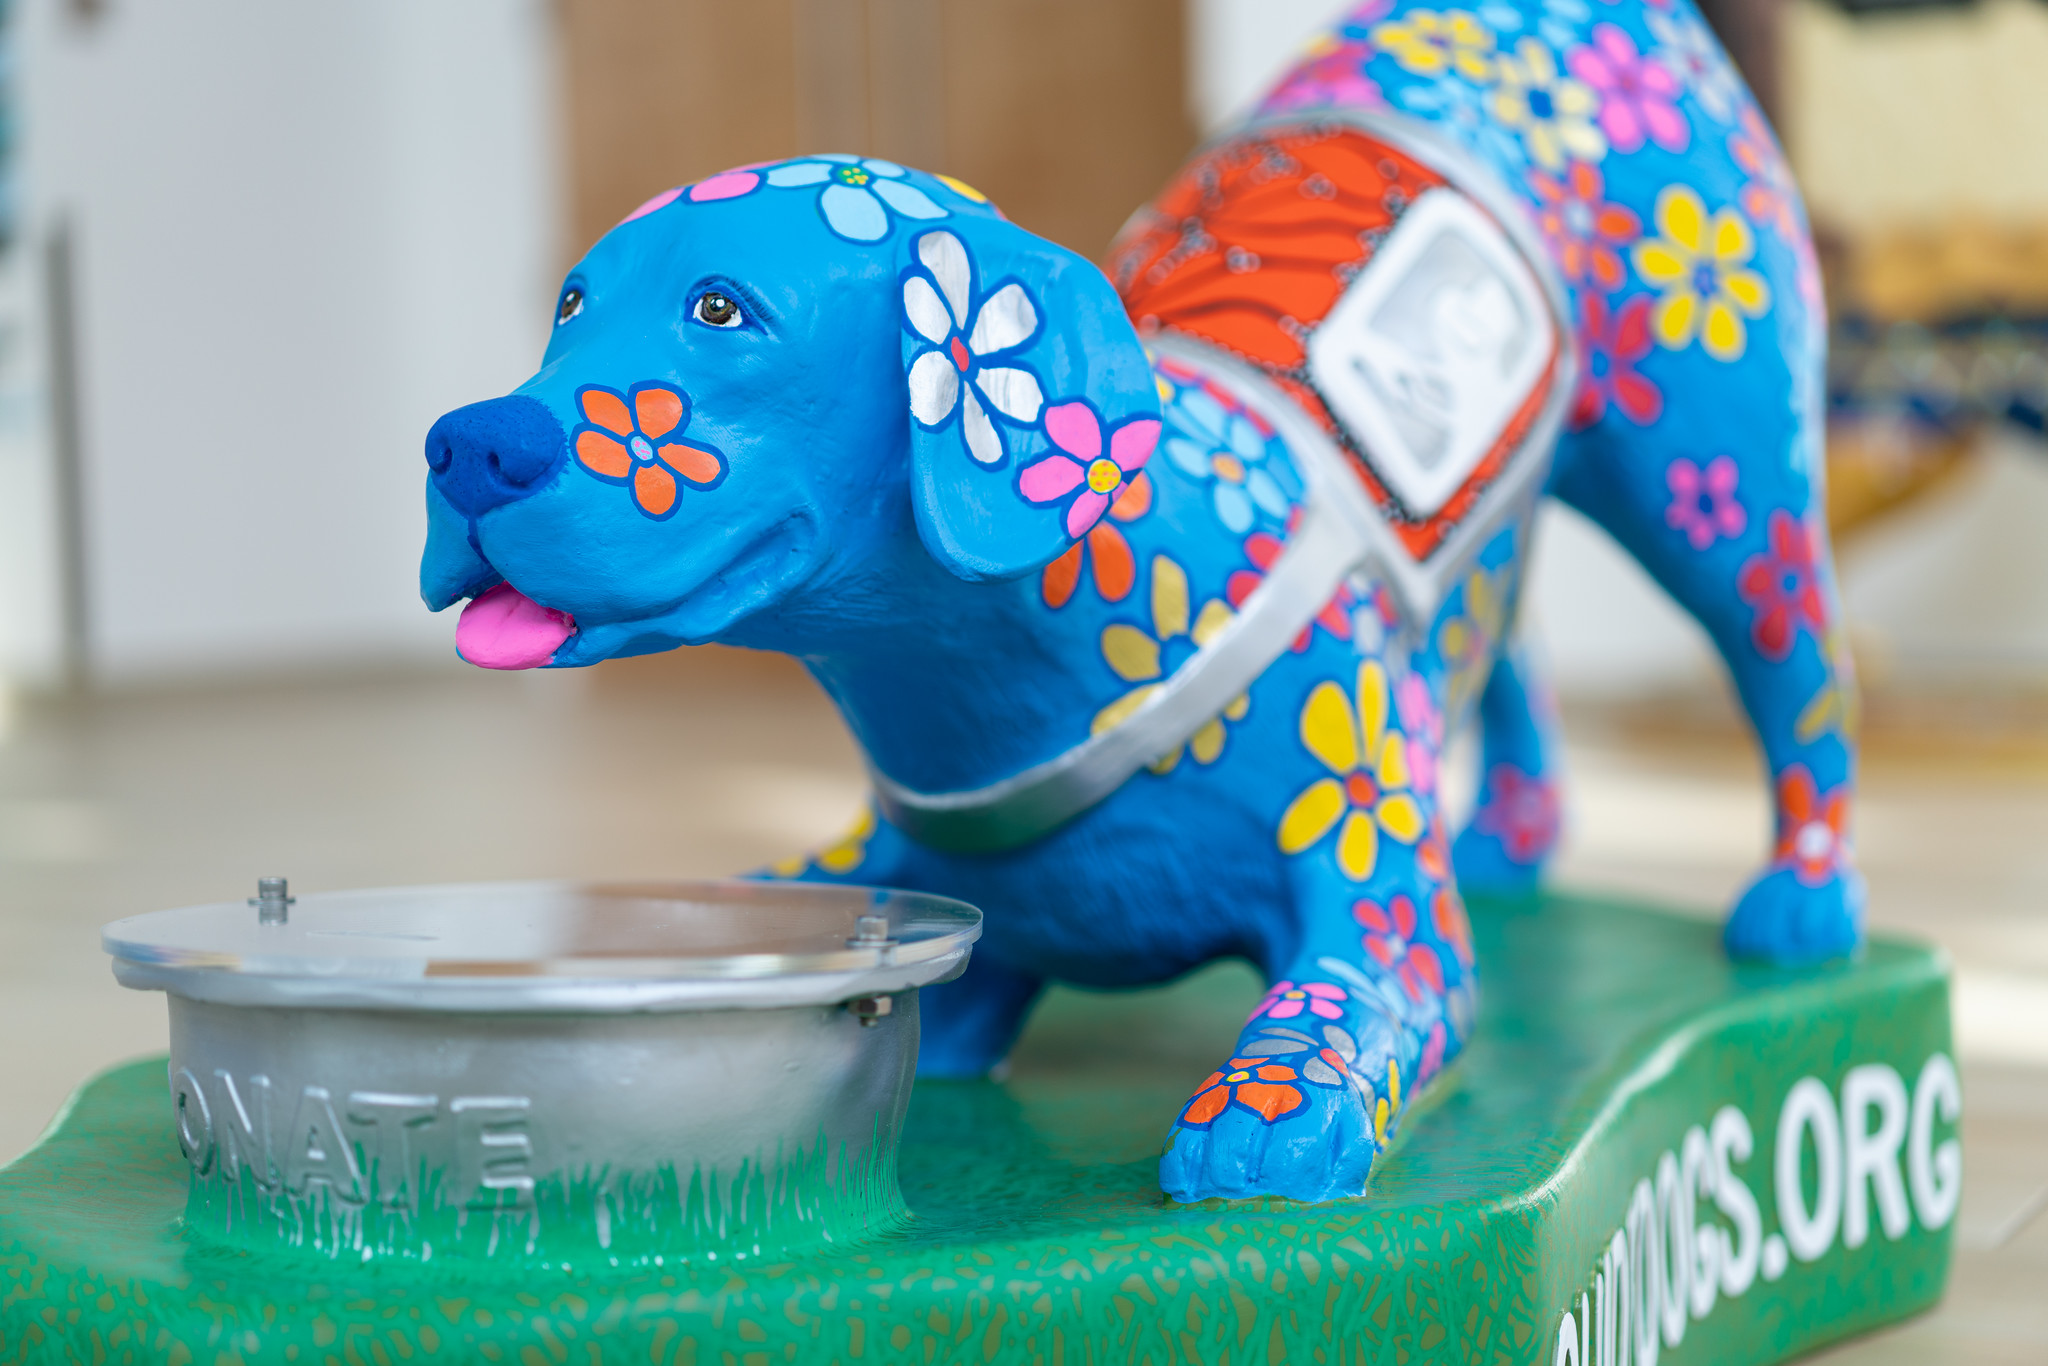 sculpture of dog in playful pose painted blue with flowers and a donate bowl